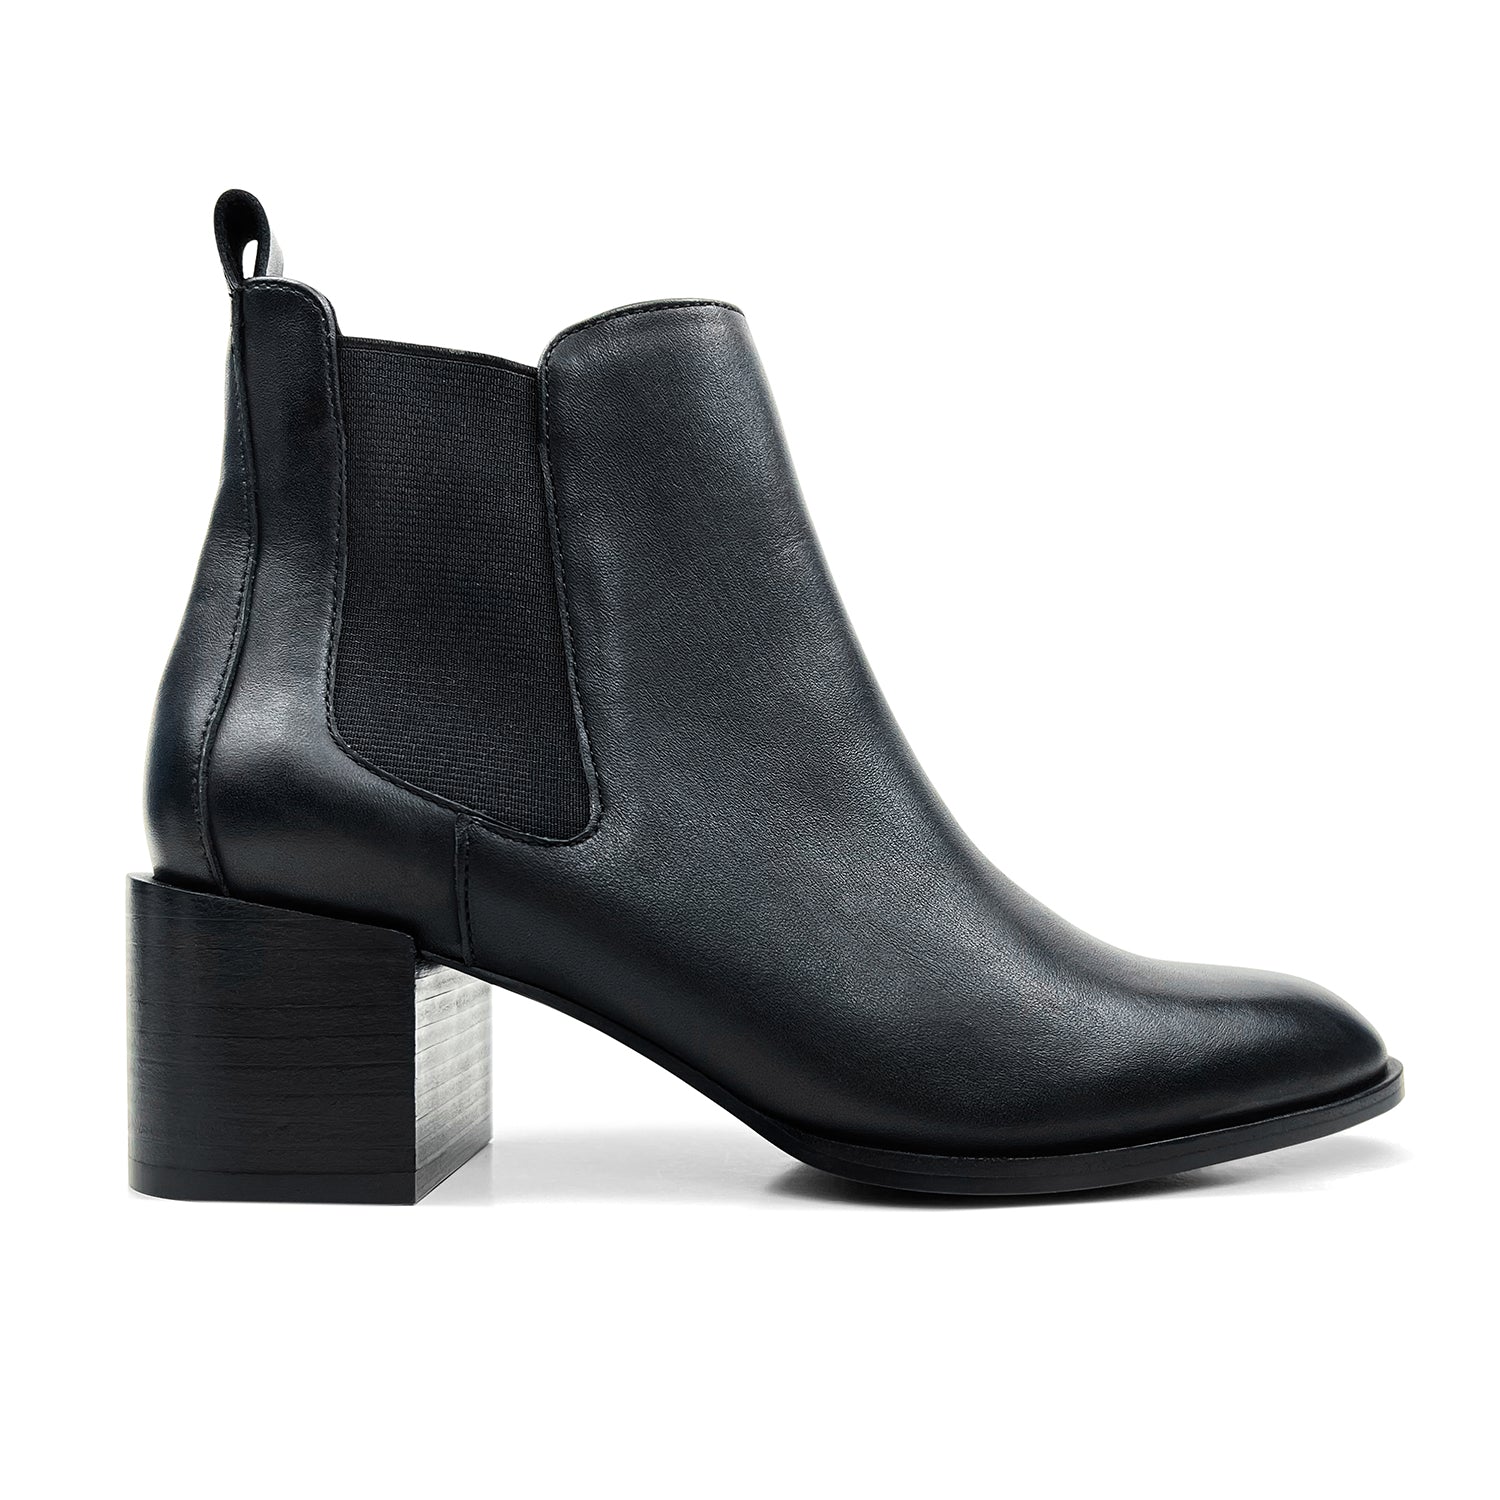 Black Chelsea Boots Pointed Toe Hot Sale | www.c1cu.com